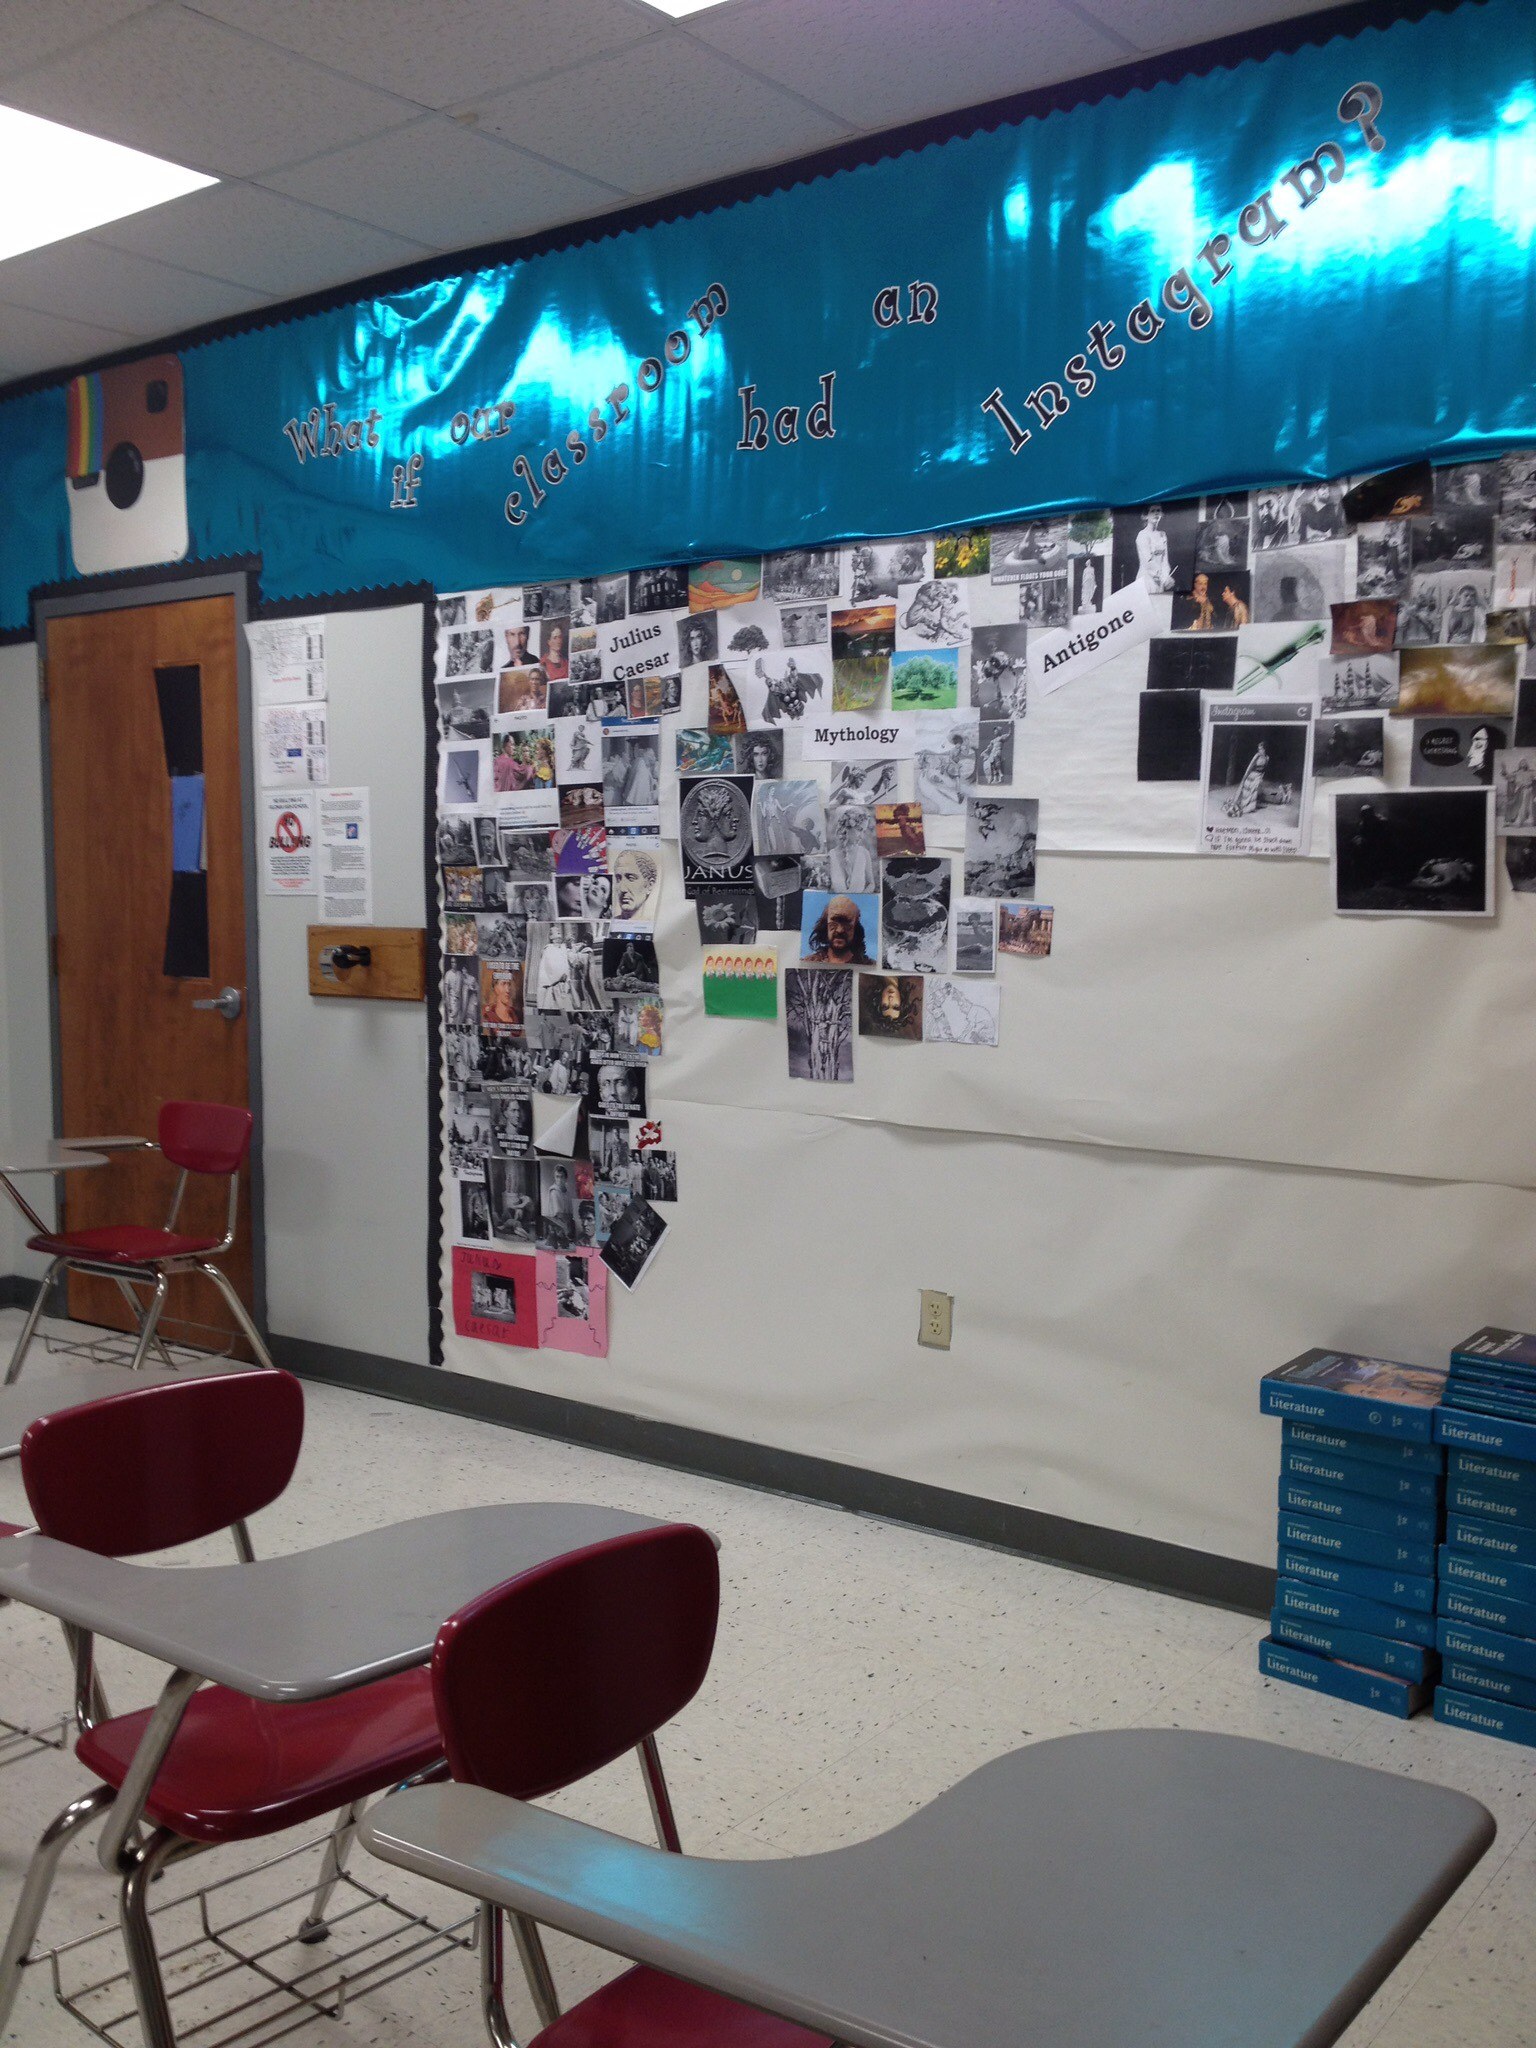 21 Clever Science Classroom Decorating Ideas for Your Classroom Door